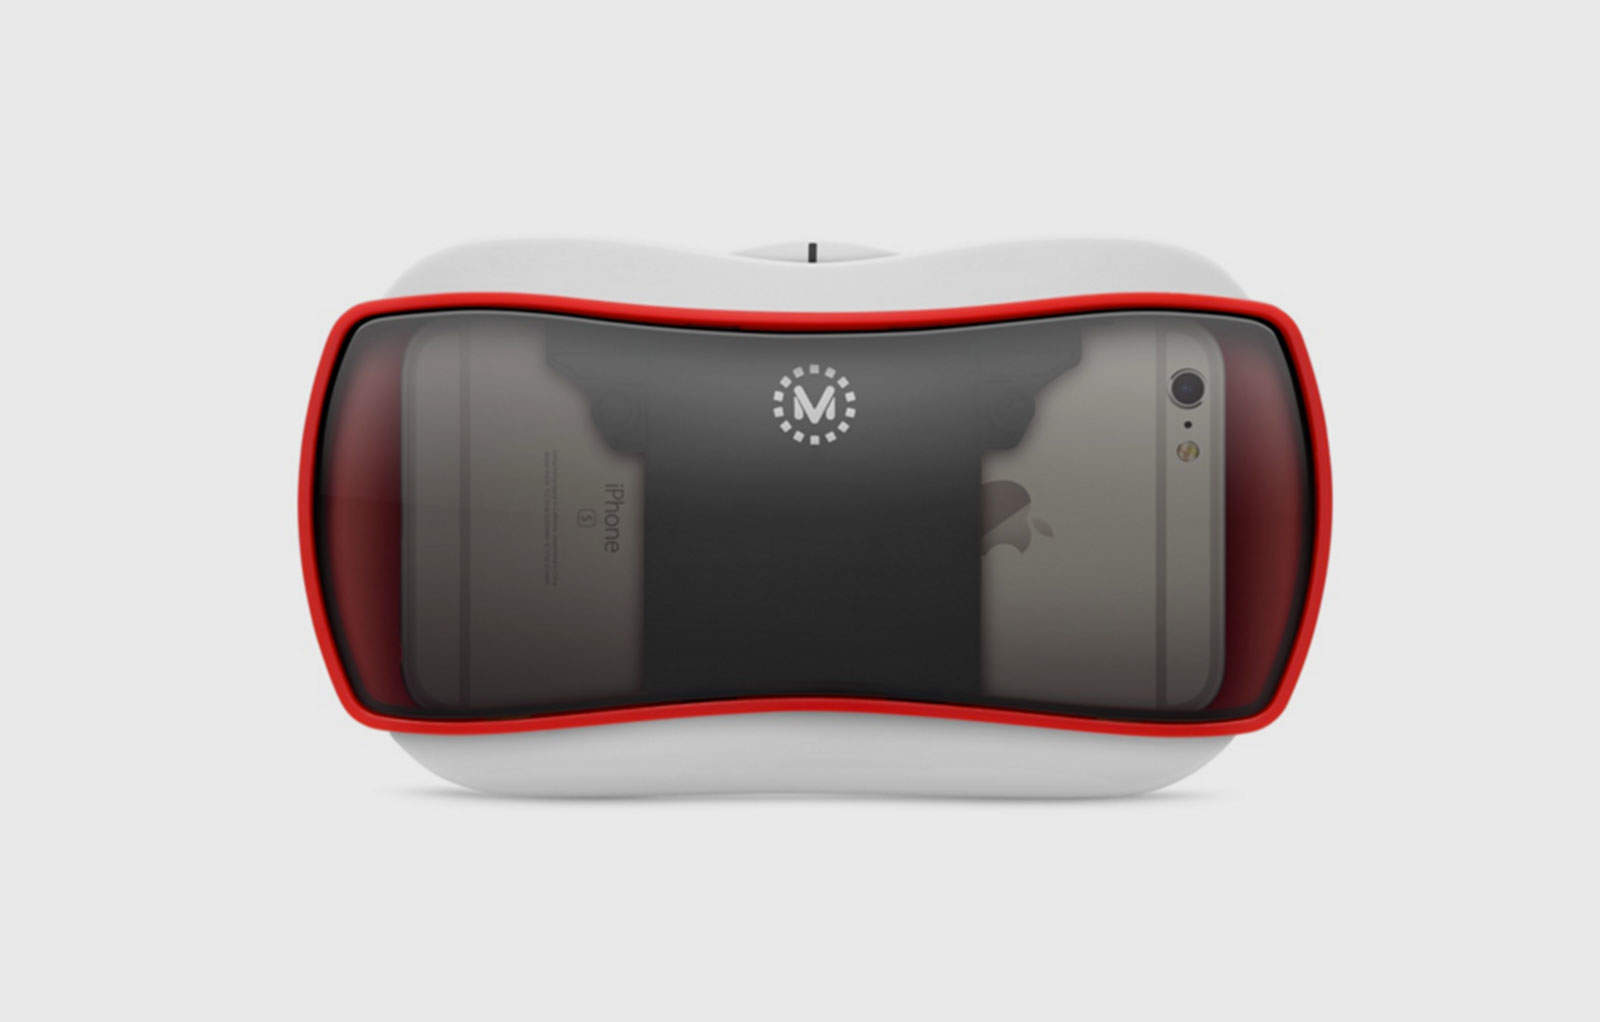 The iPhone looks good inside the View-Master VR headset.